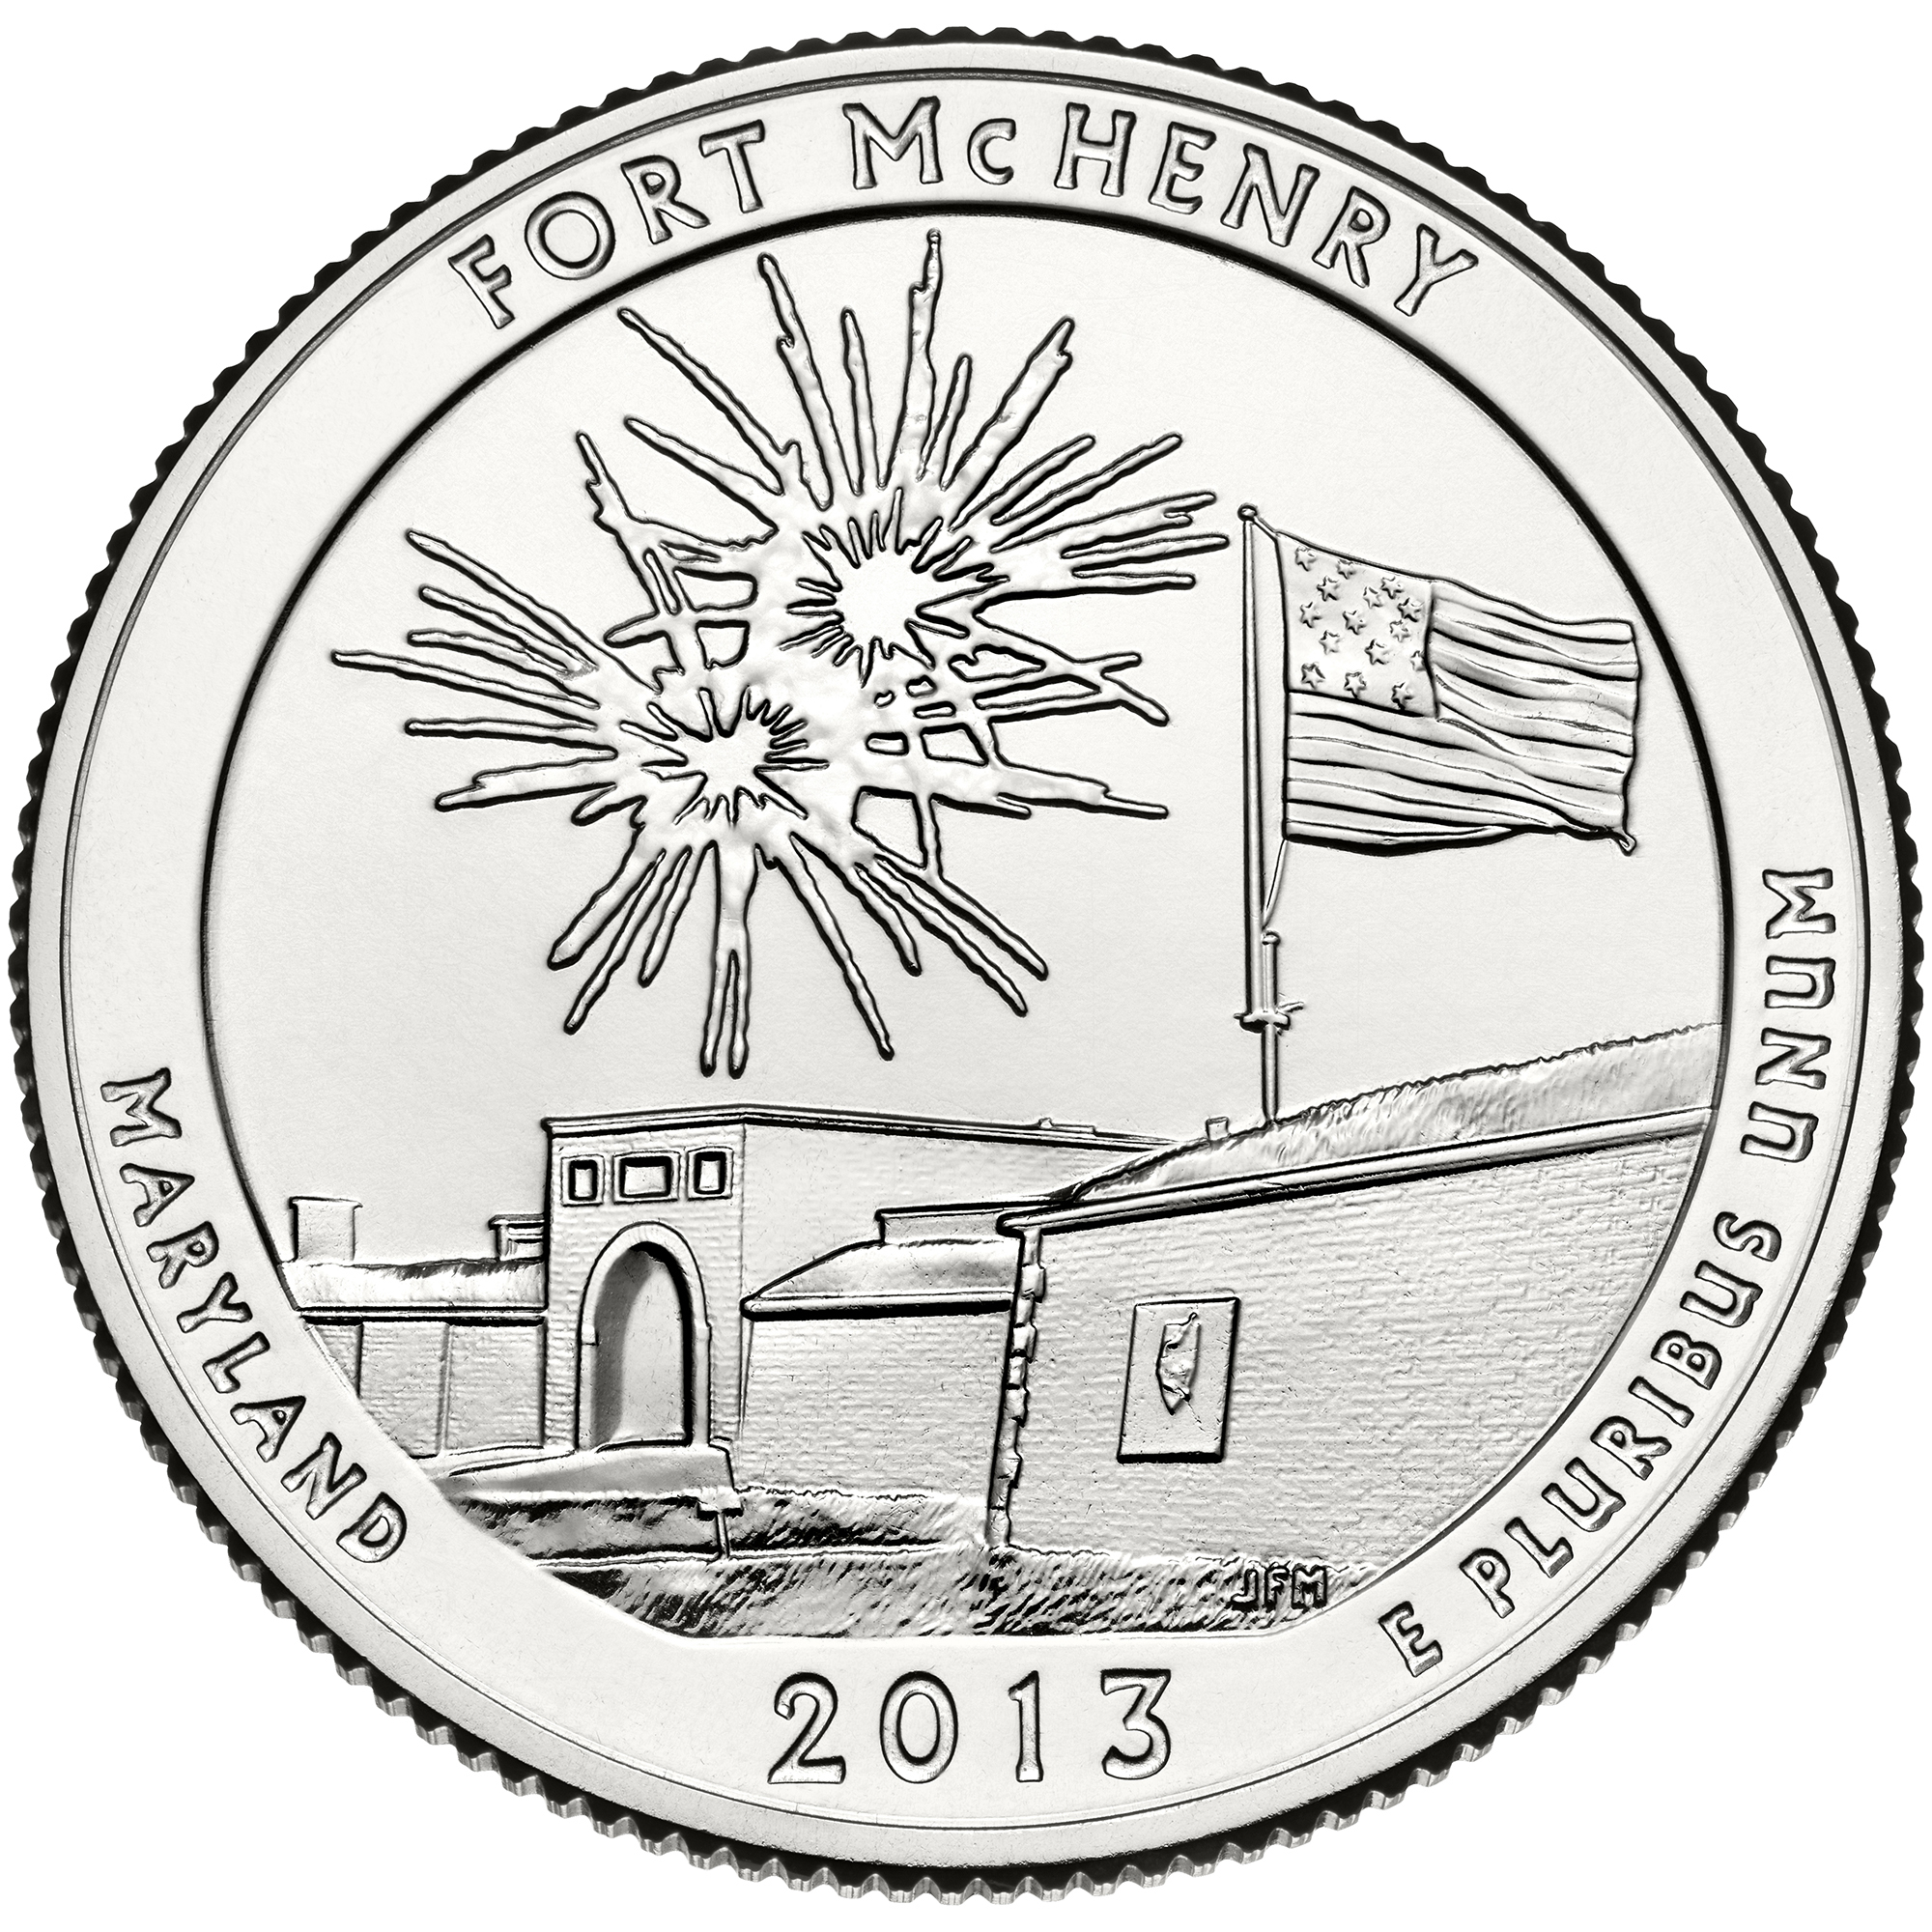 2013 America The Beautiful Quarters Coin Fort Mchenry Maryland Uncirculated Reverse